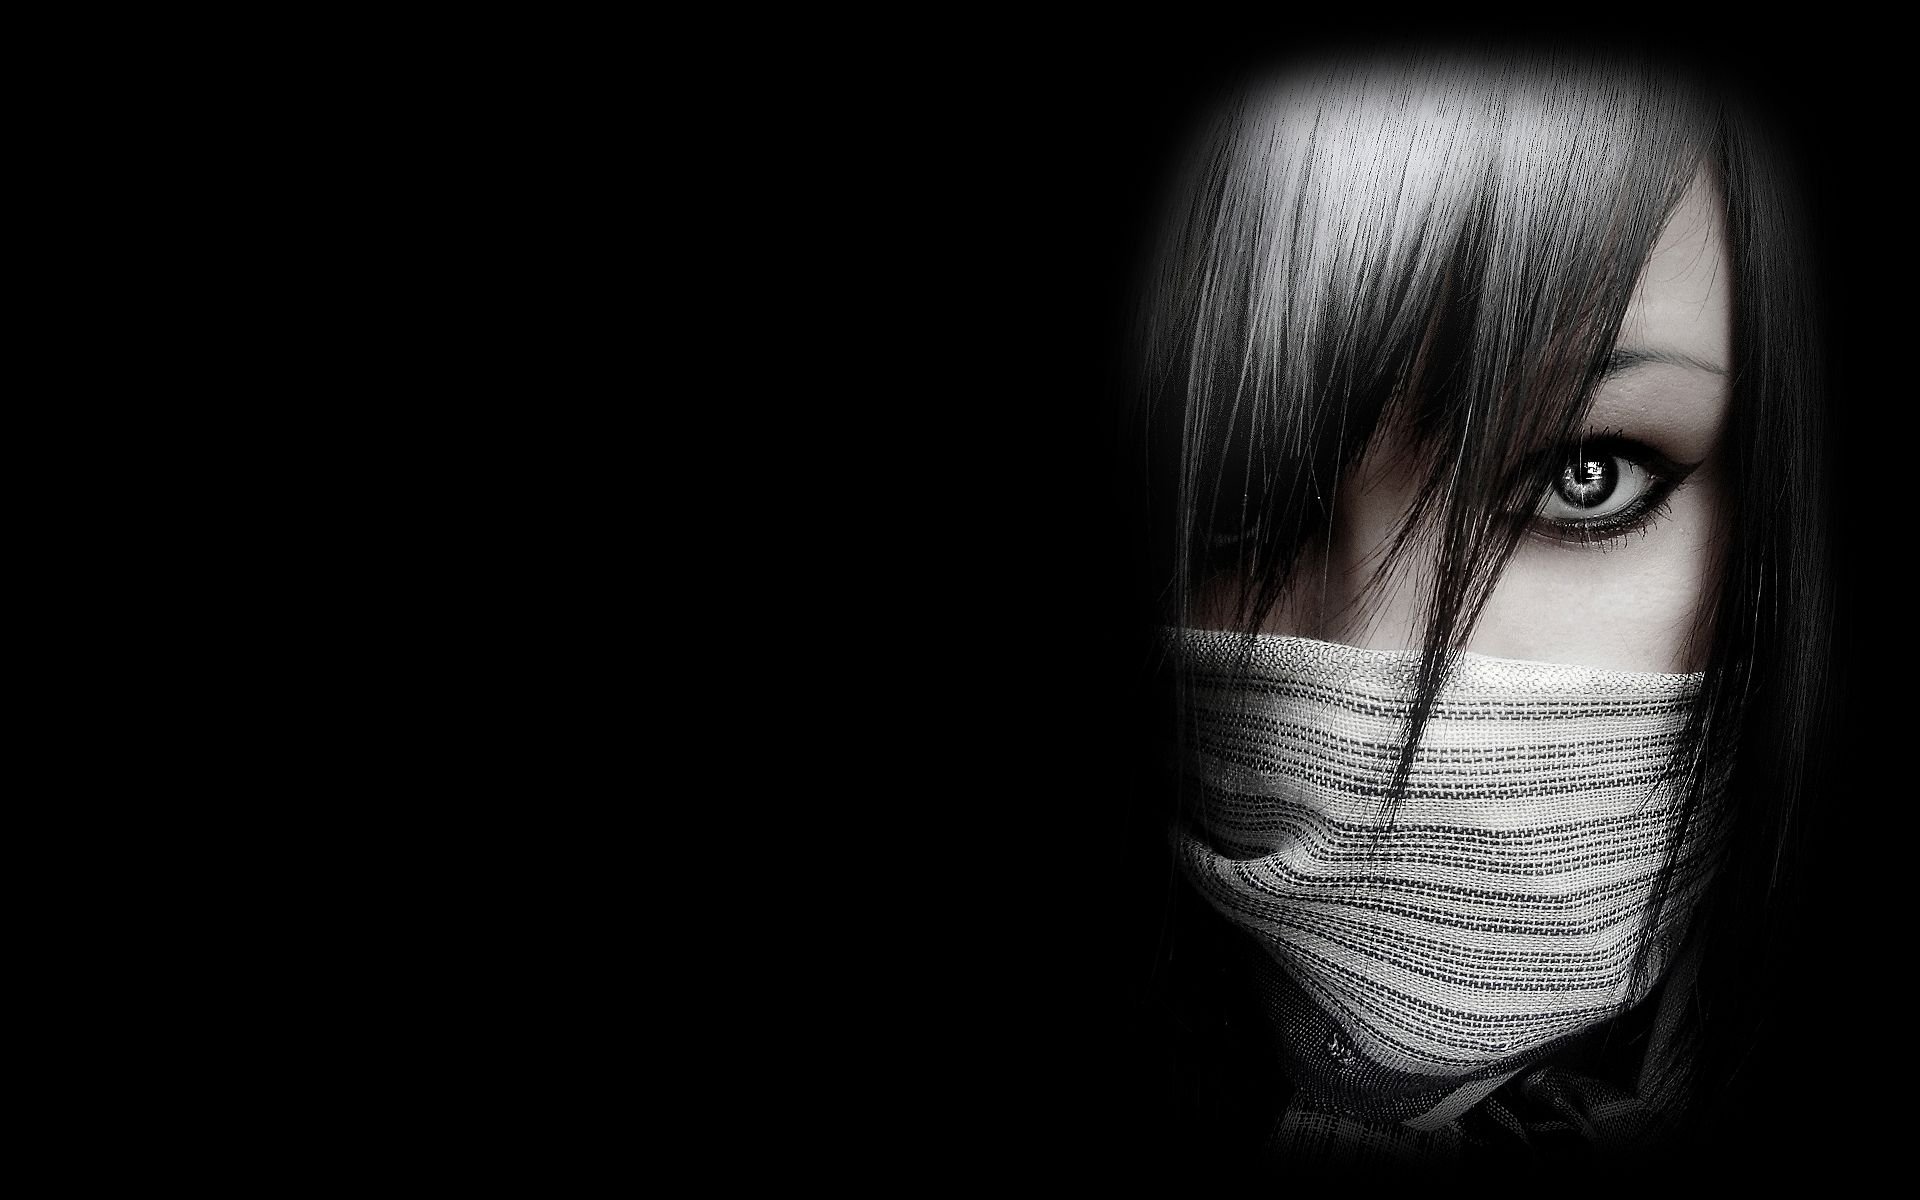 Emo Girl In The Shadows Wallpaper - Emo Girls , HD Wallpaper & Backgrounds